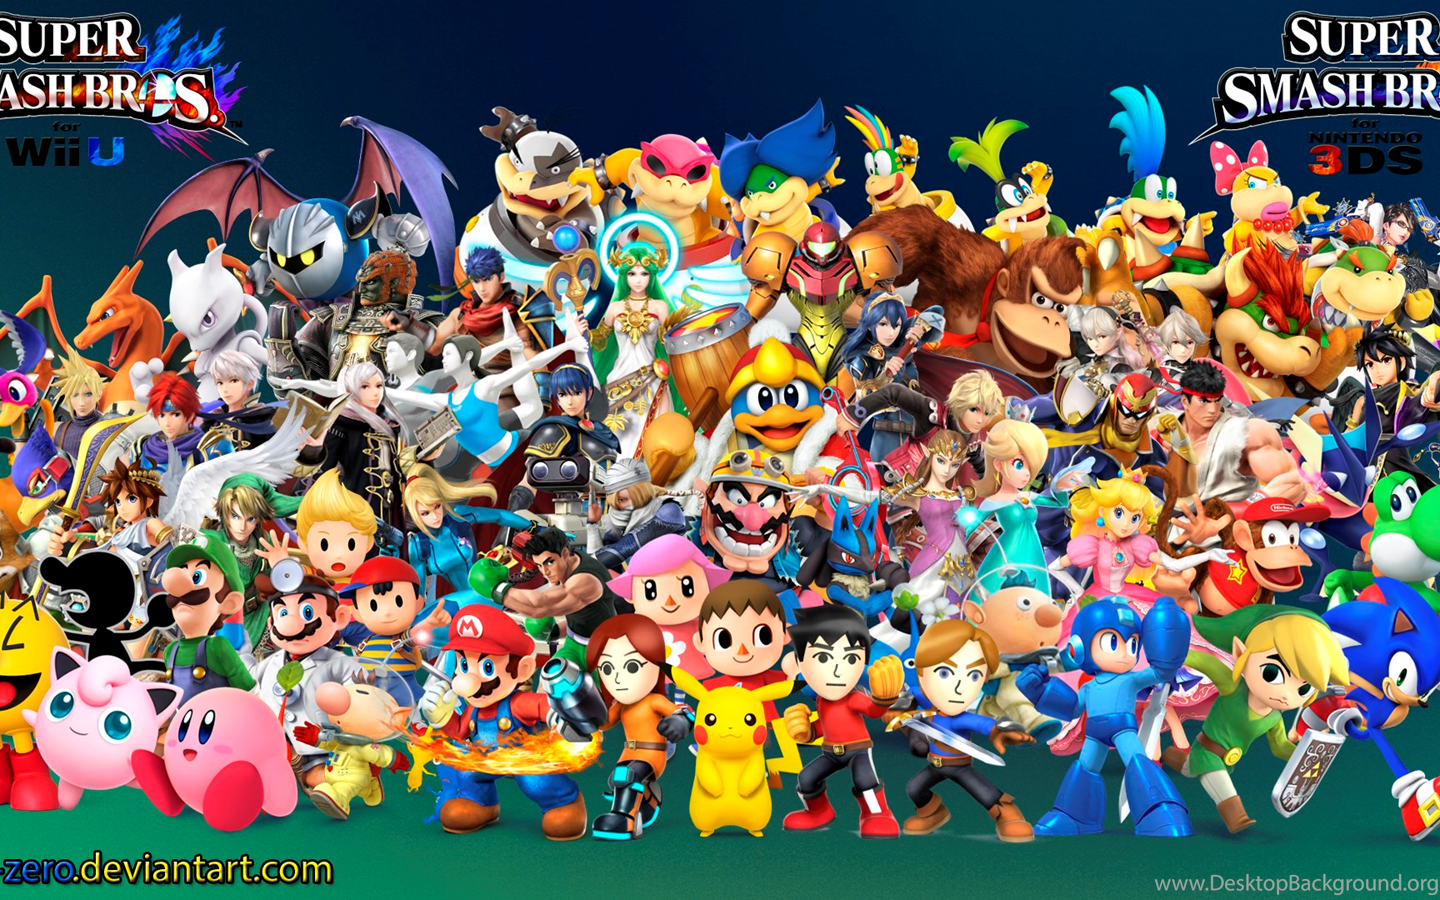 Download Super Smash Bros Wii U / 3DS Wallpapers By Seancantrell On Deviant...